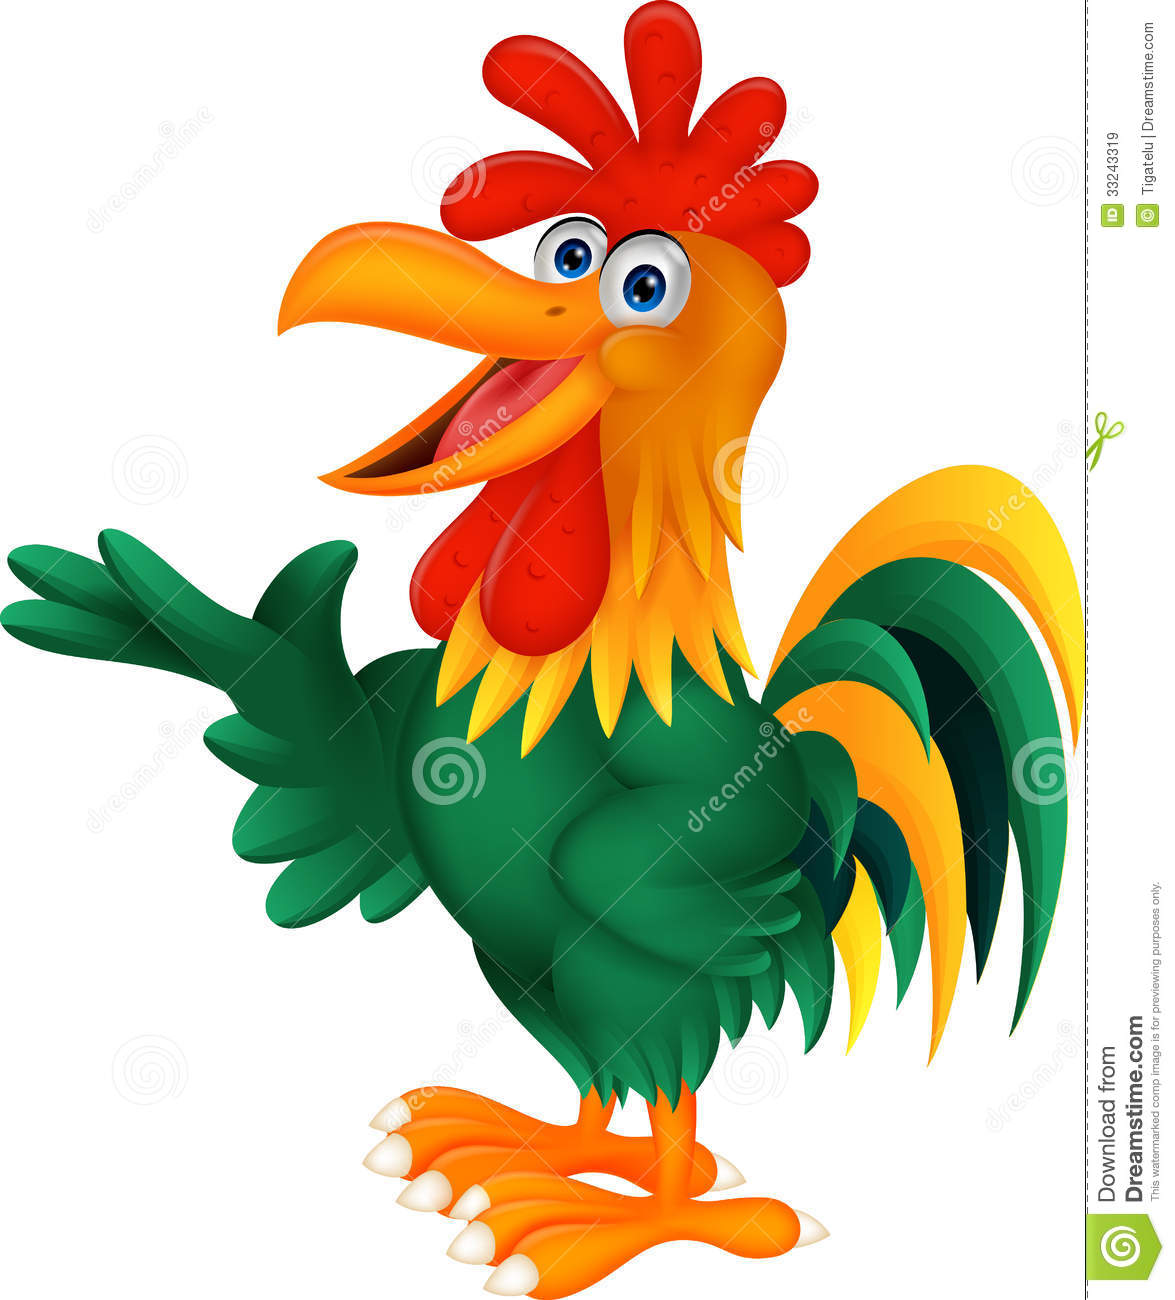 Cute Rooster Cartoon Presenting Royalty Free Stock Images   Image    